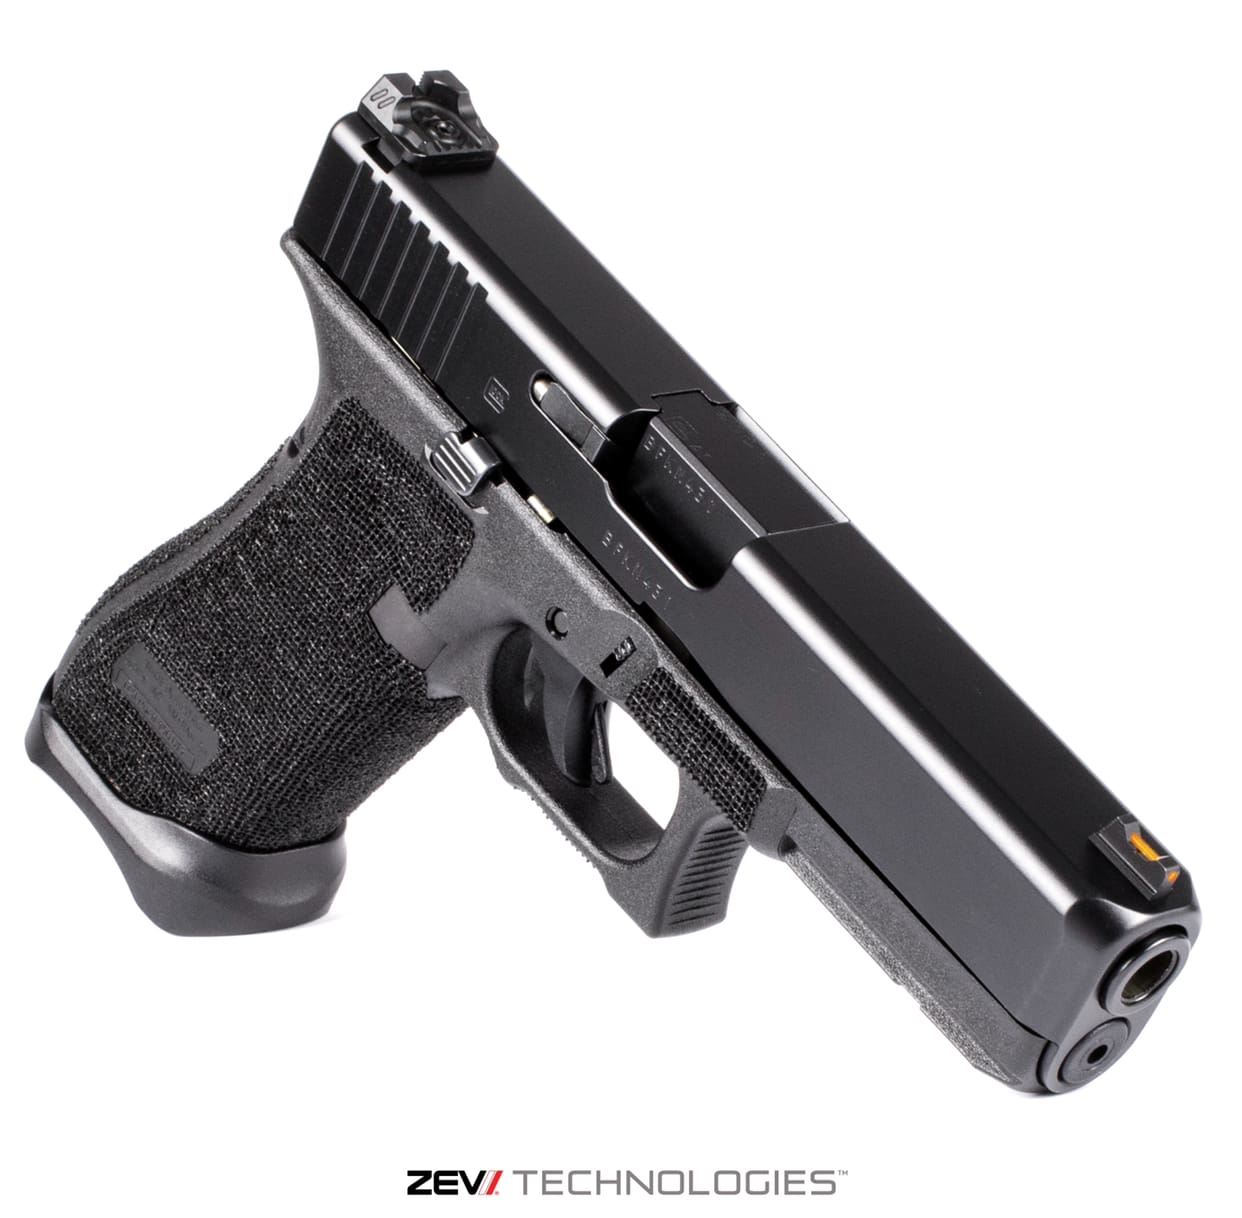 Related image of Zev Technologies Gen5 Compact Pro Magwell Soldier Systems ...